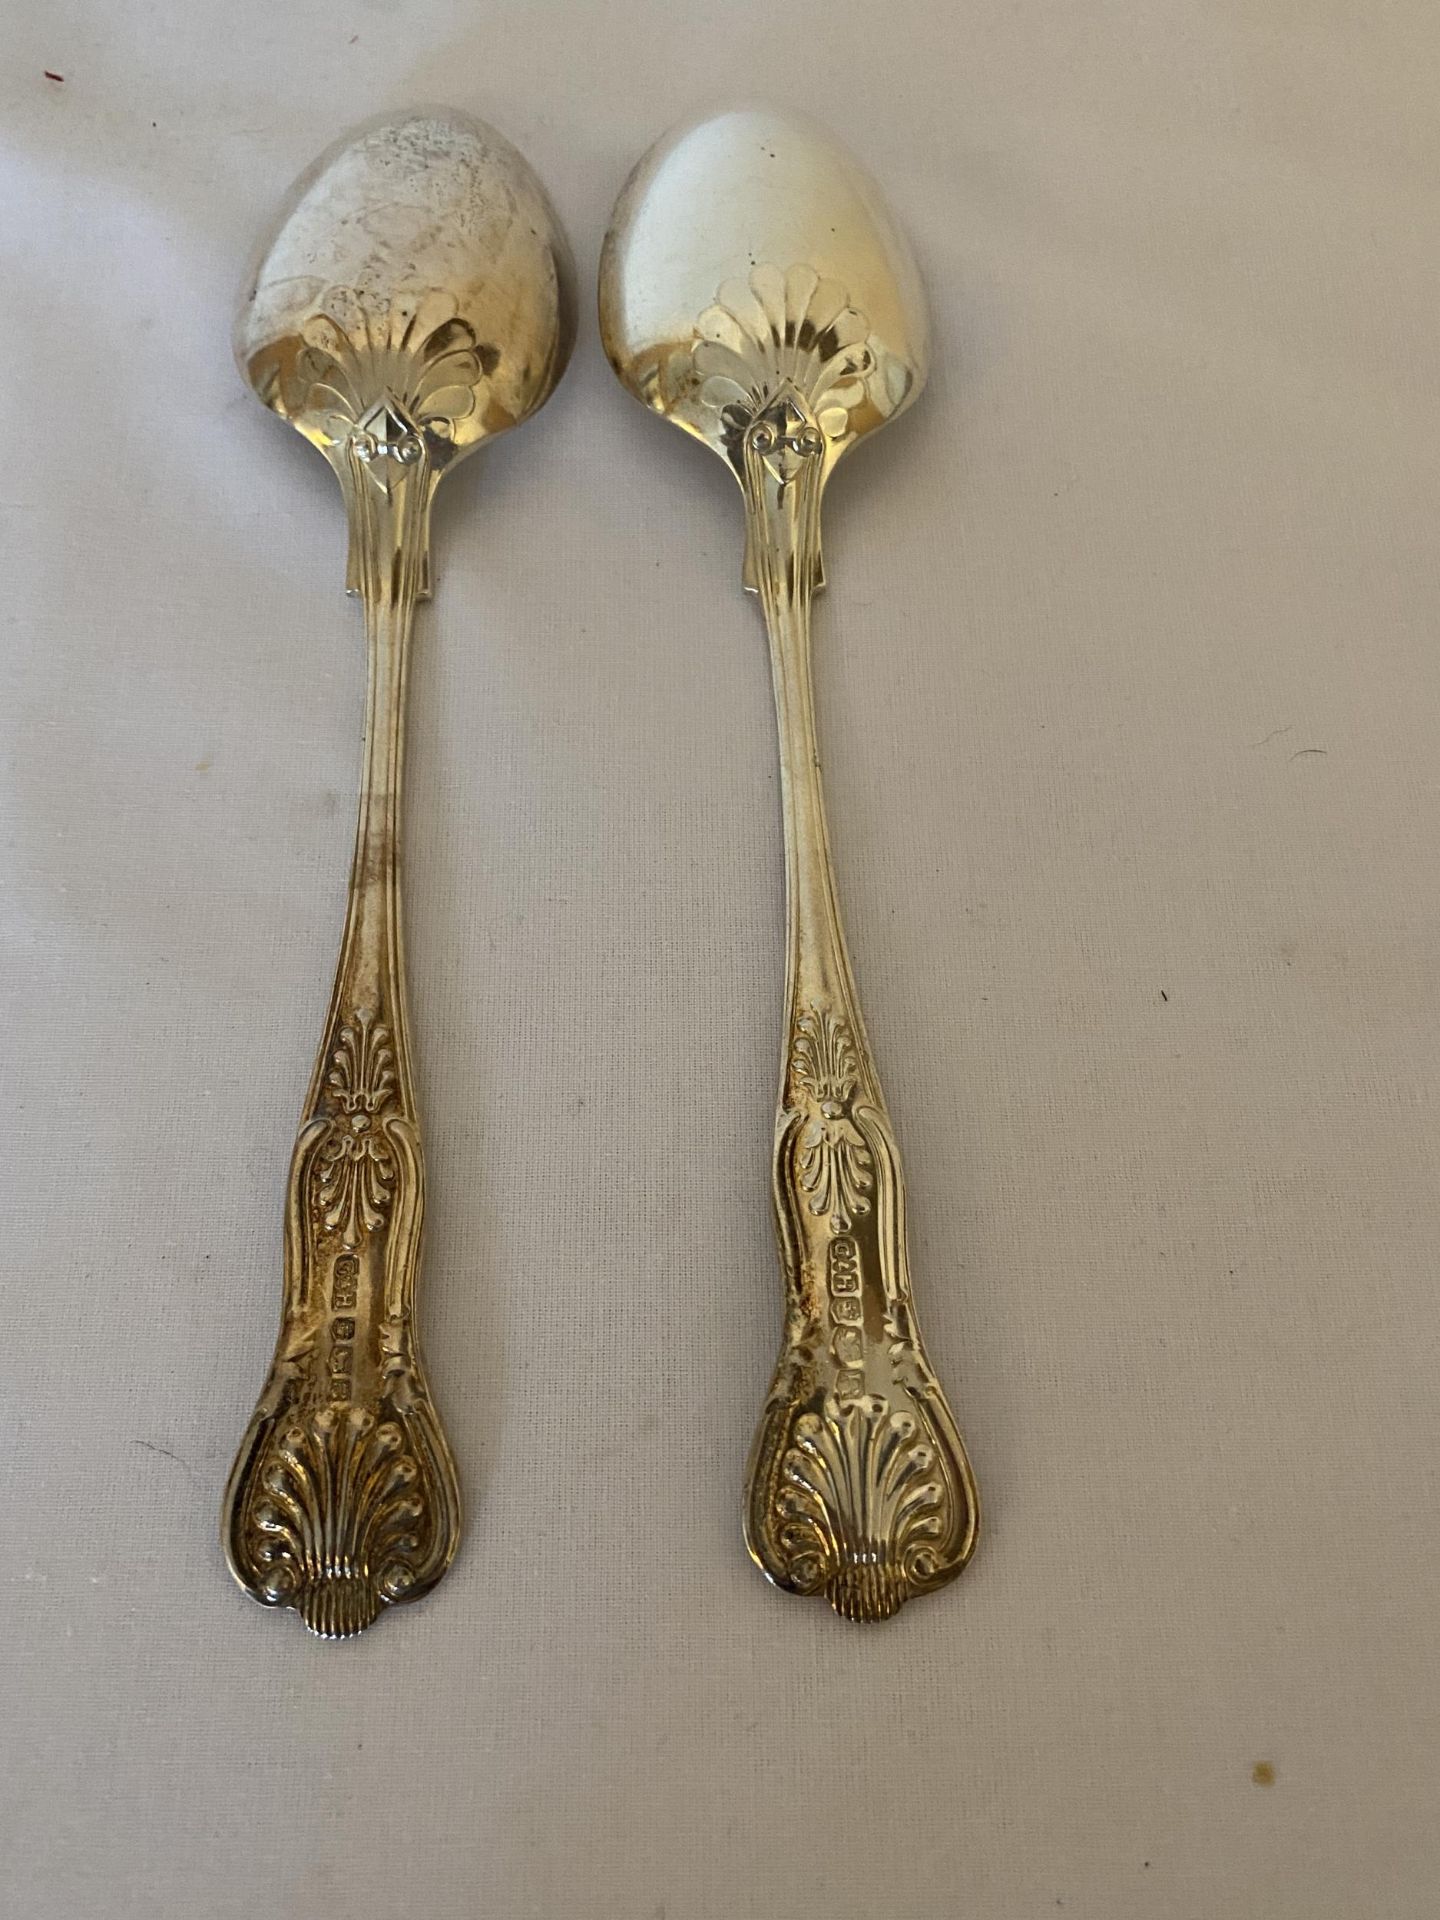 A PAIR OF ELIZABETH II 1959 HALLMARKED SHEFFIELD SILVER SPOONS, MAKER GEE & HOLMES, GROSS WEIGHT 187 - Image 8 of 15